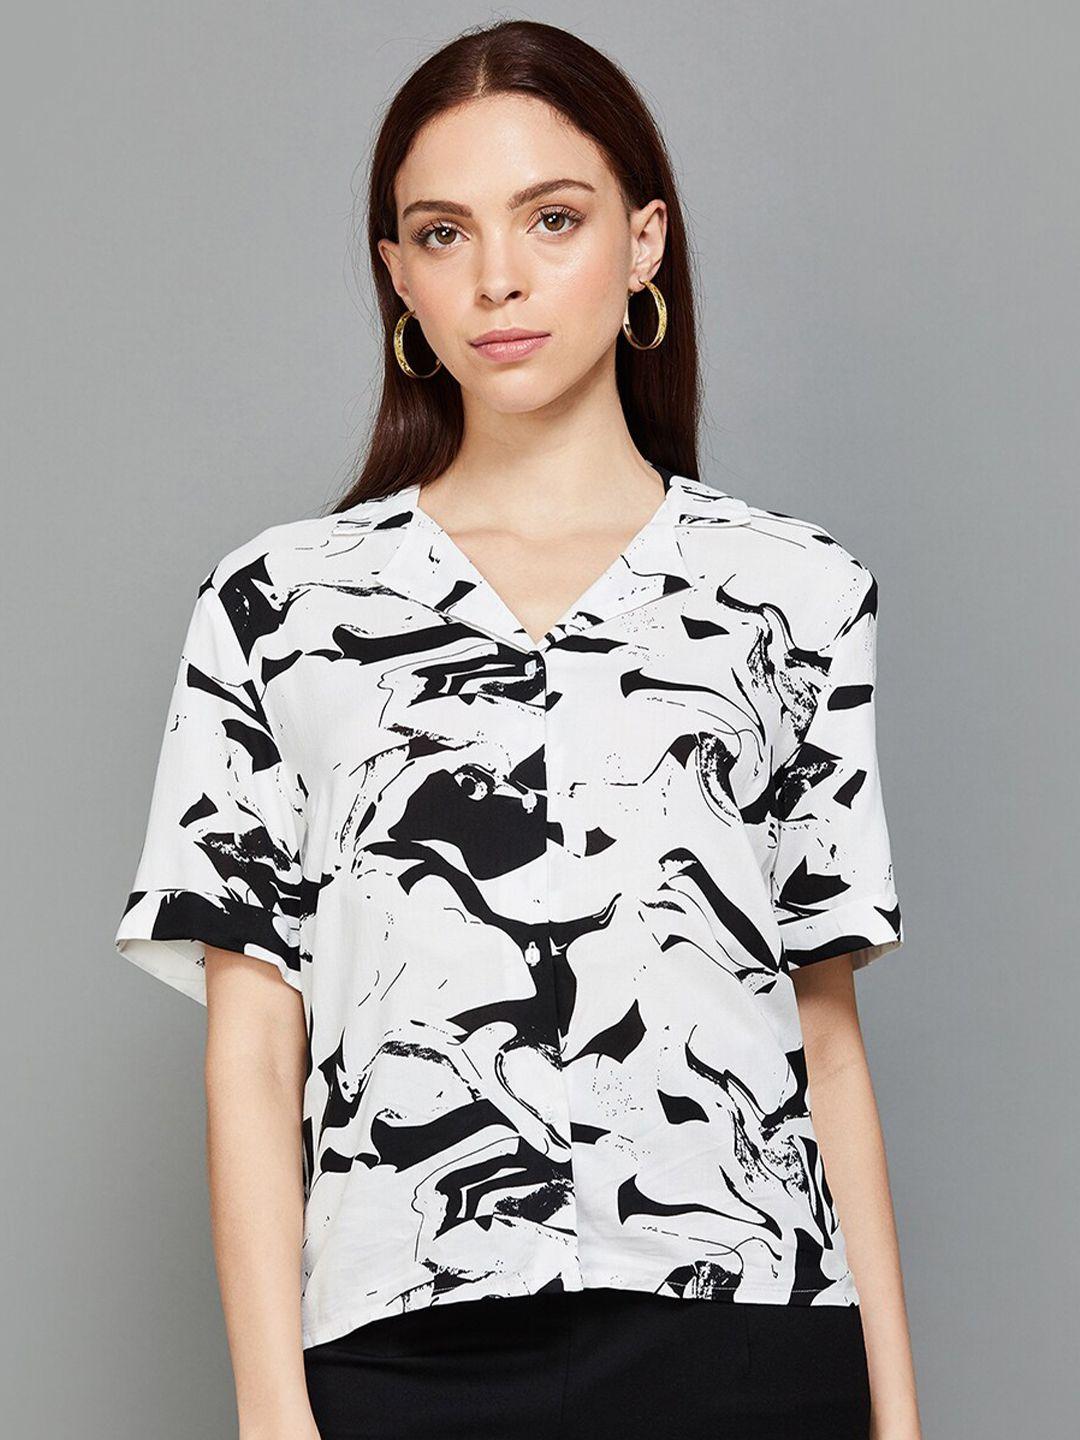 ginger by lifestyle abstract printed shirt style top